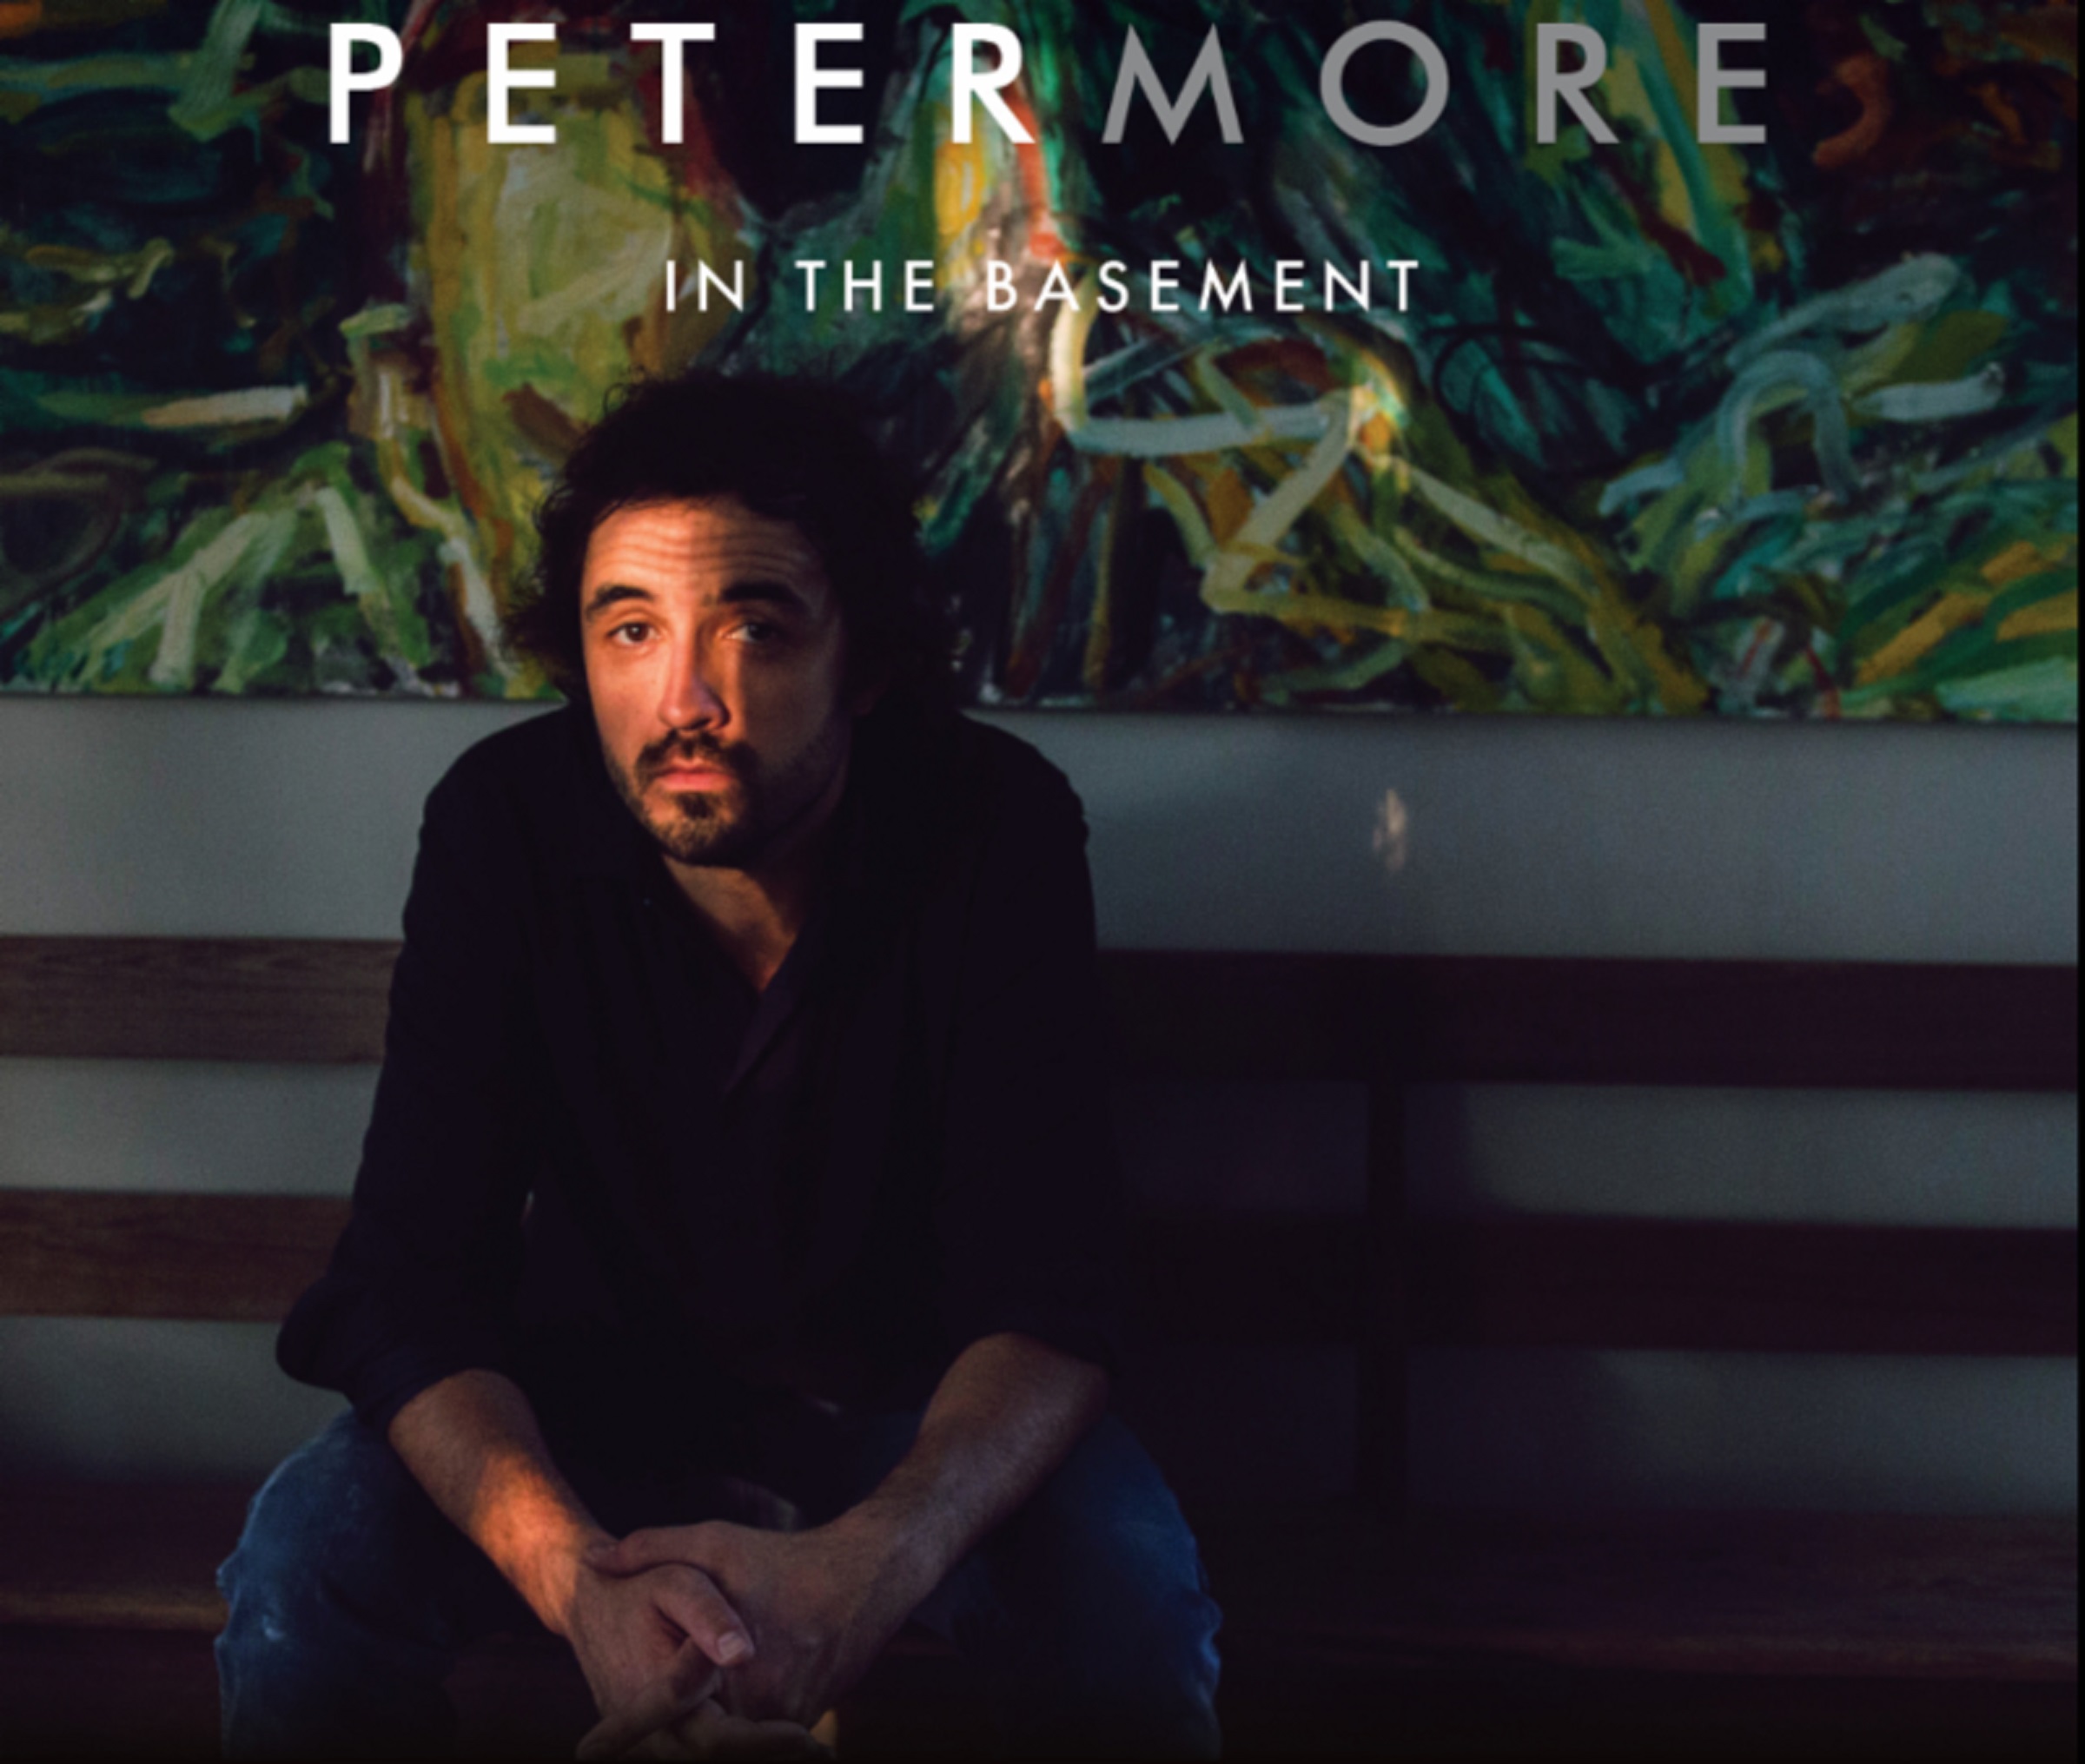 Peter More Debuts Offical Video For "In The Basement"